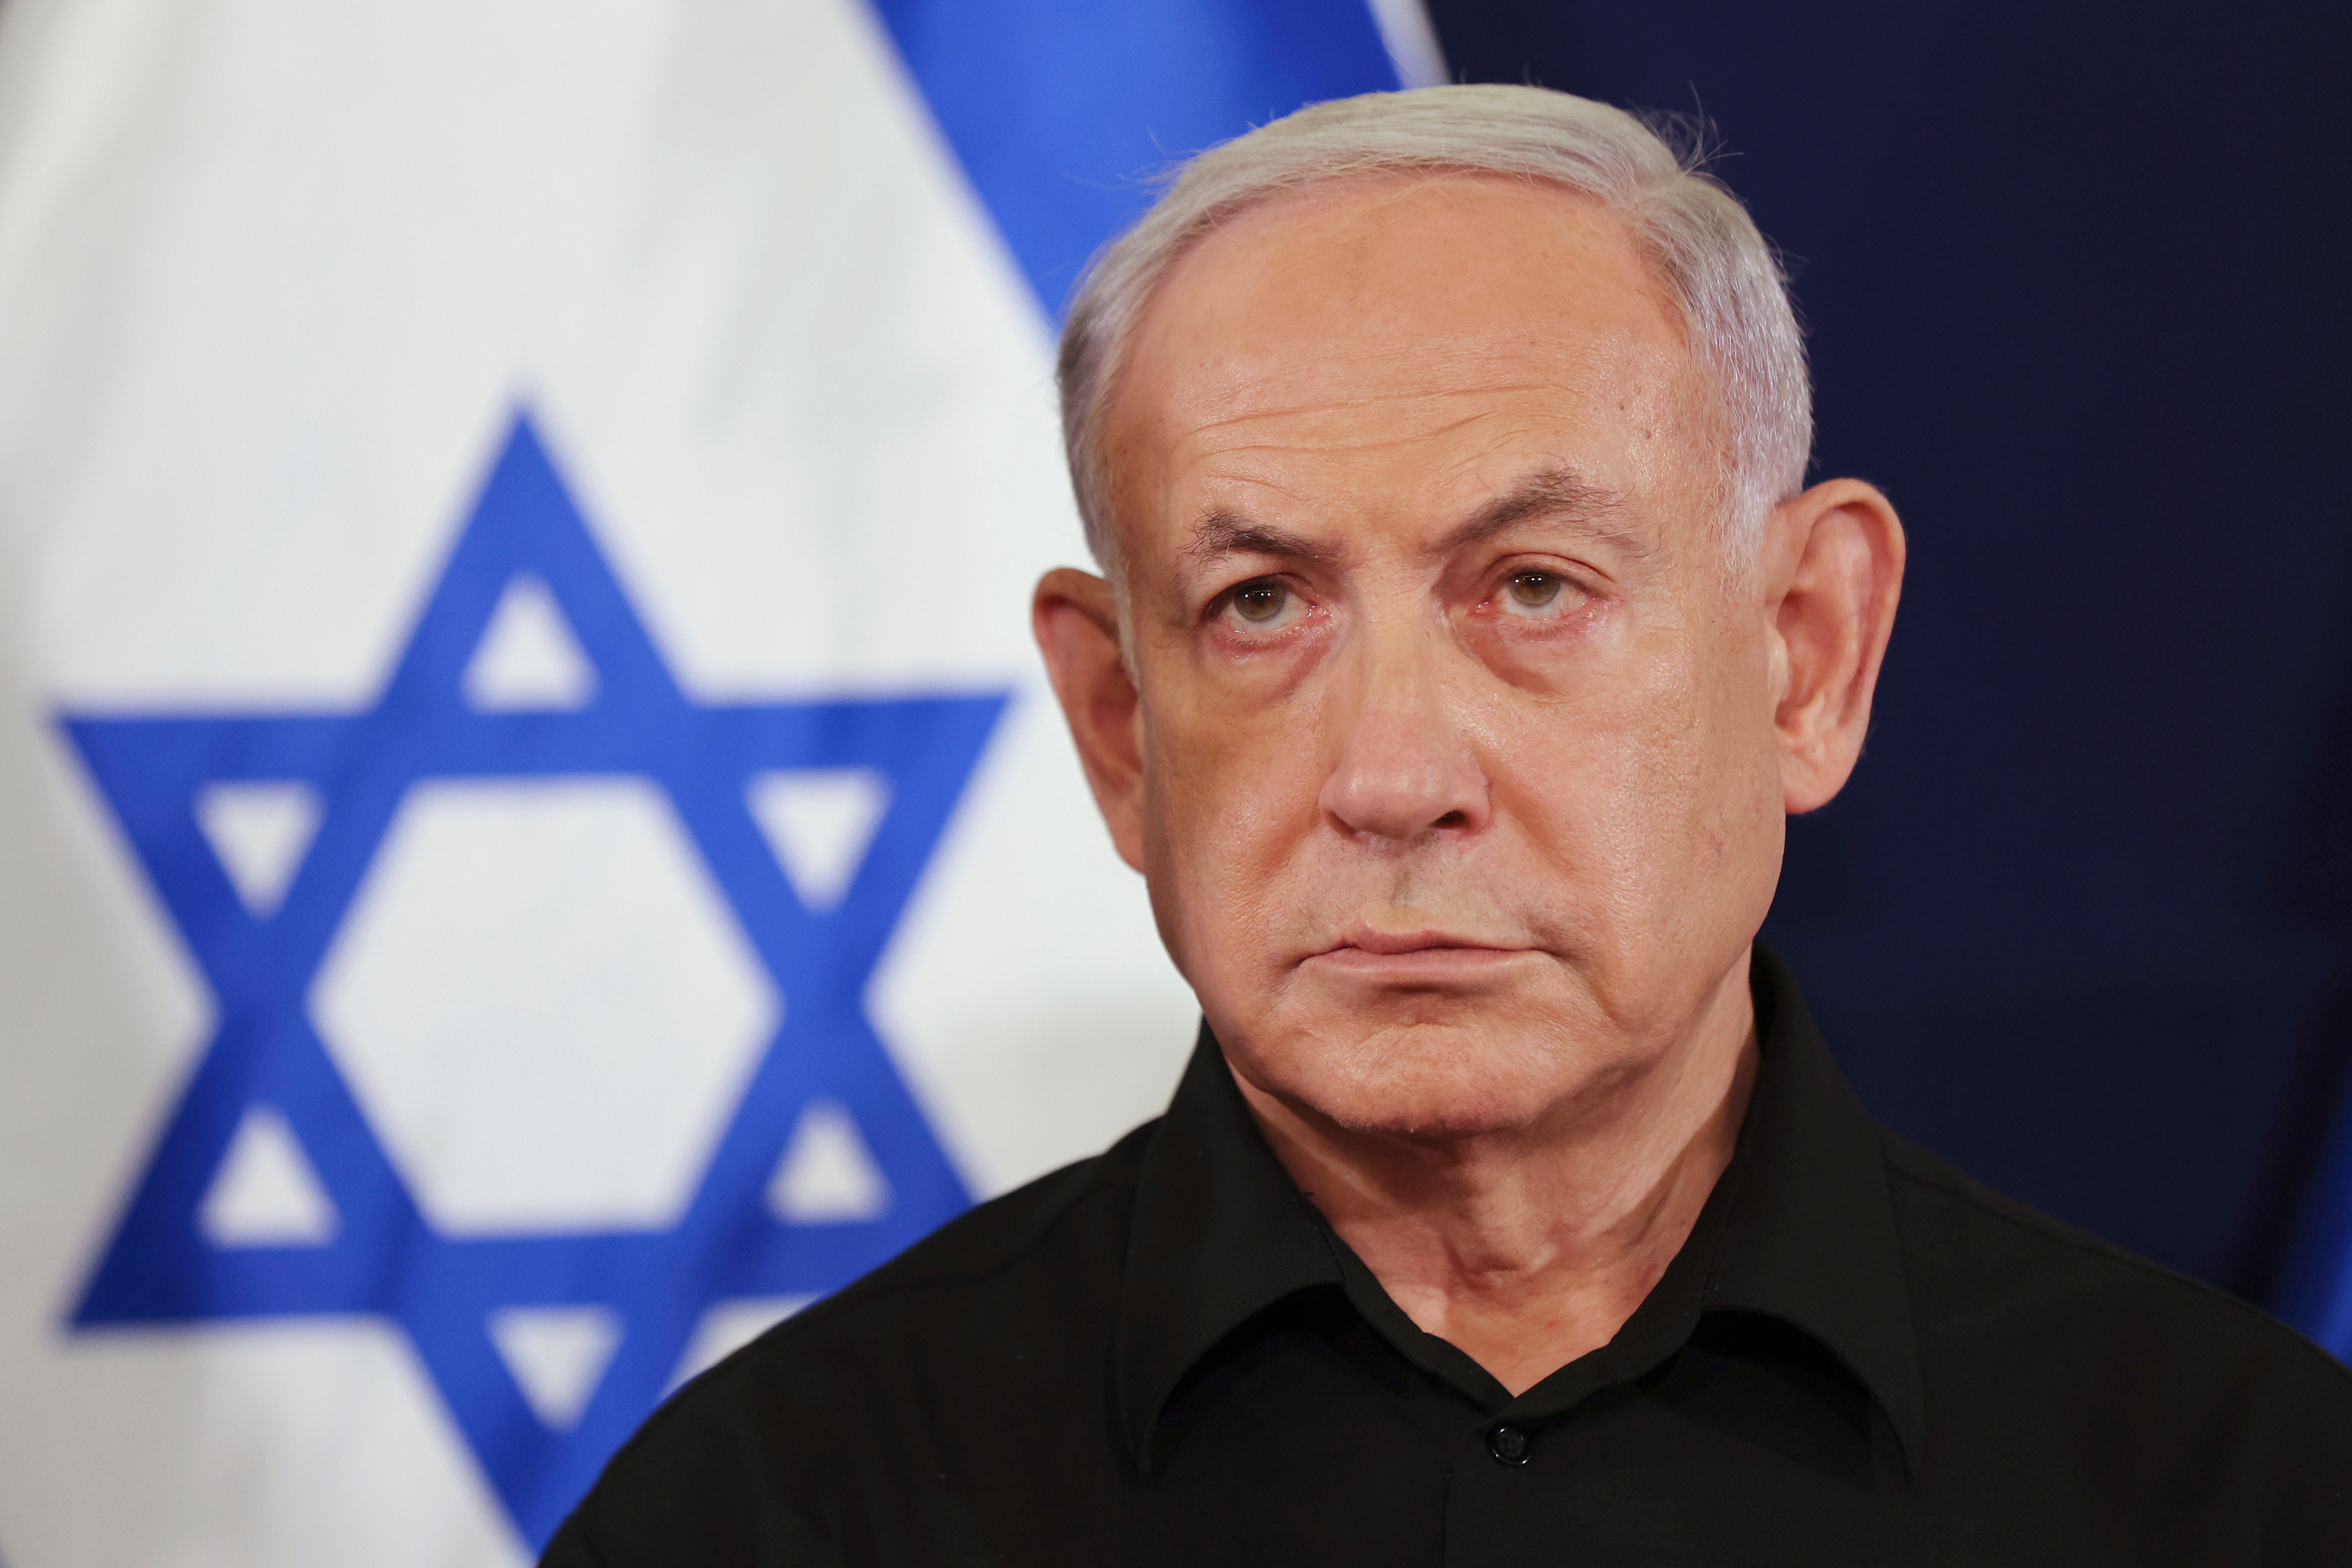 Benjamin Netanyahu said the state of Israel ‘cannot accept’ the demands of Hamas